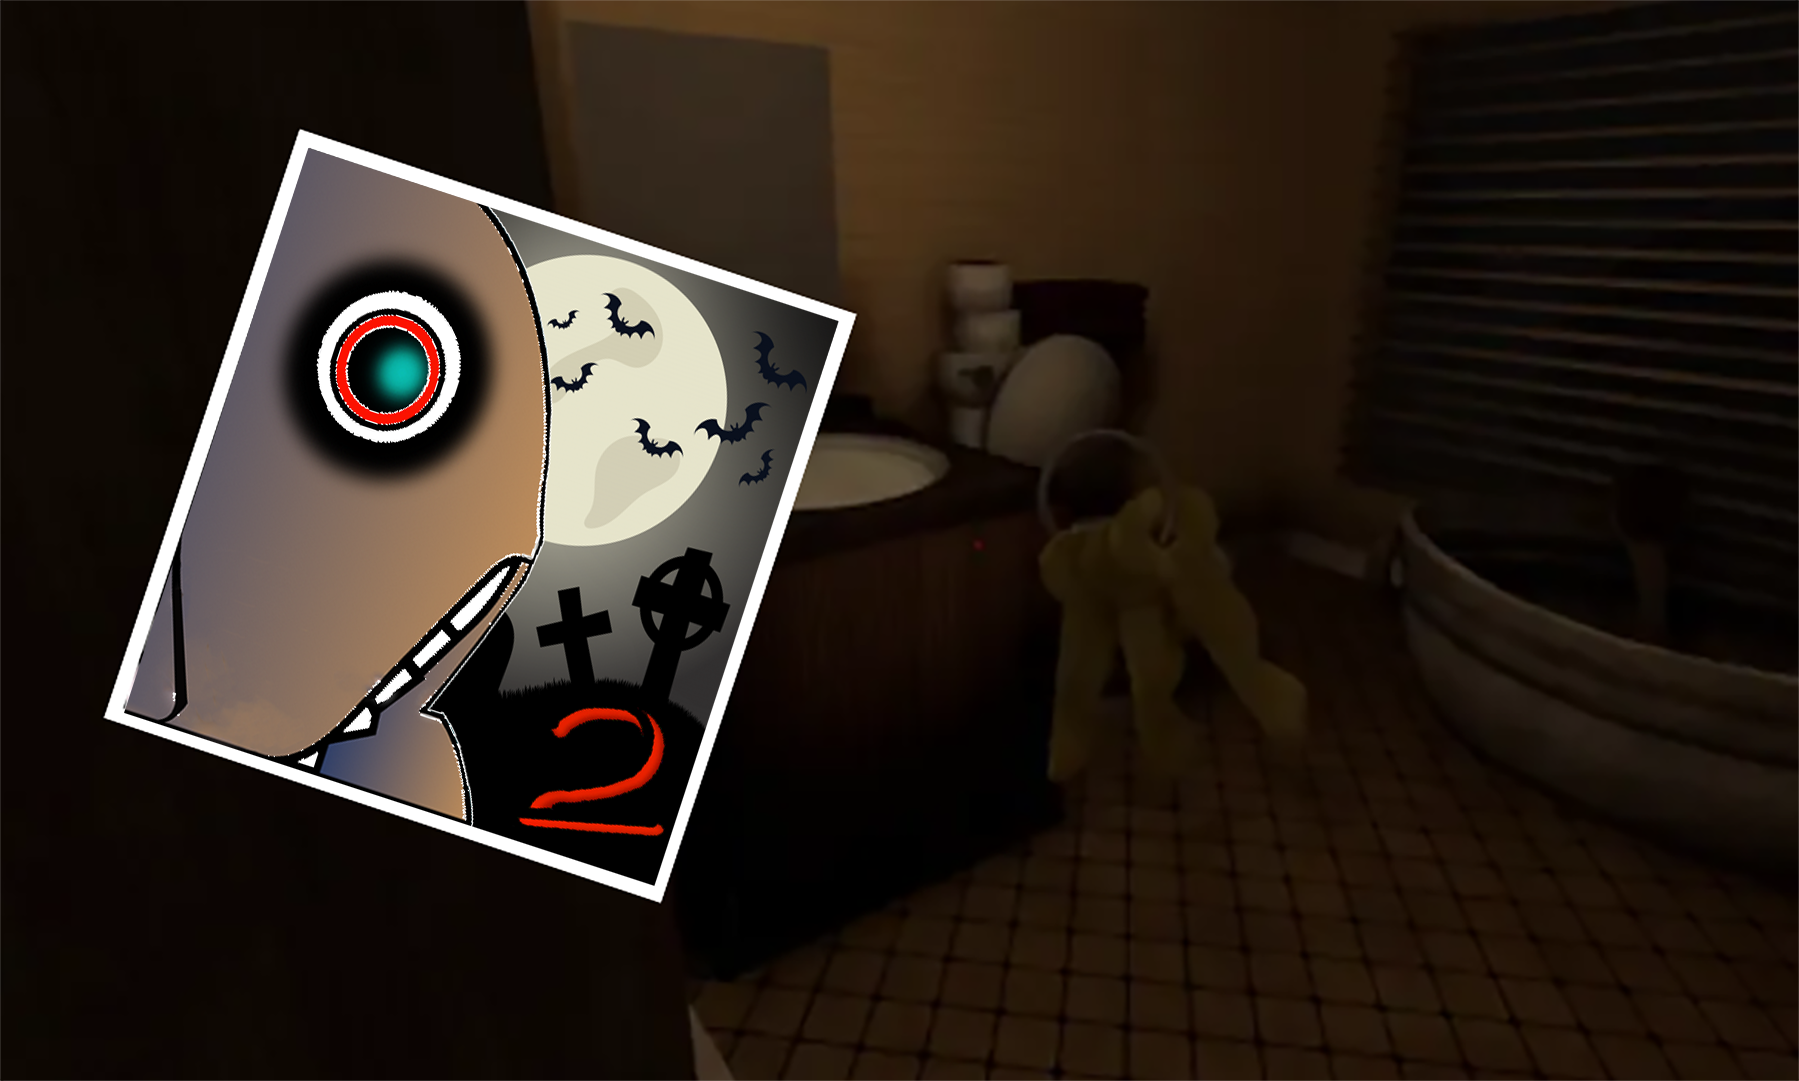 Fear The Man Beside The Window android iOS apk download for free